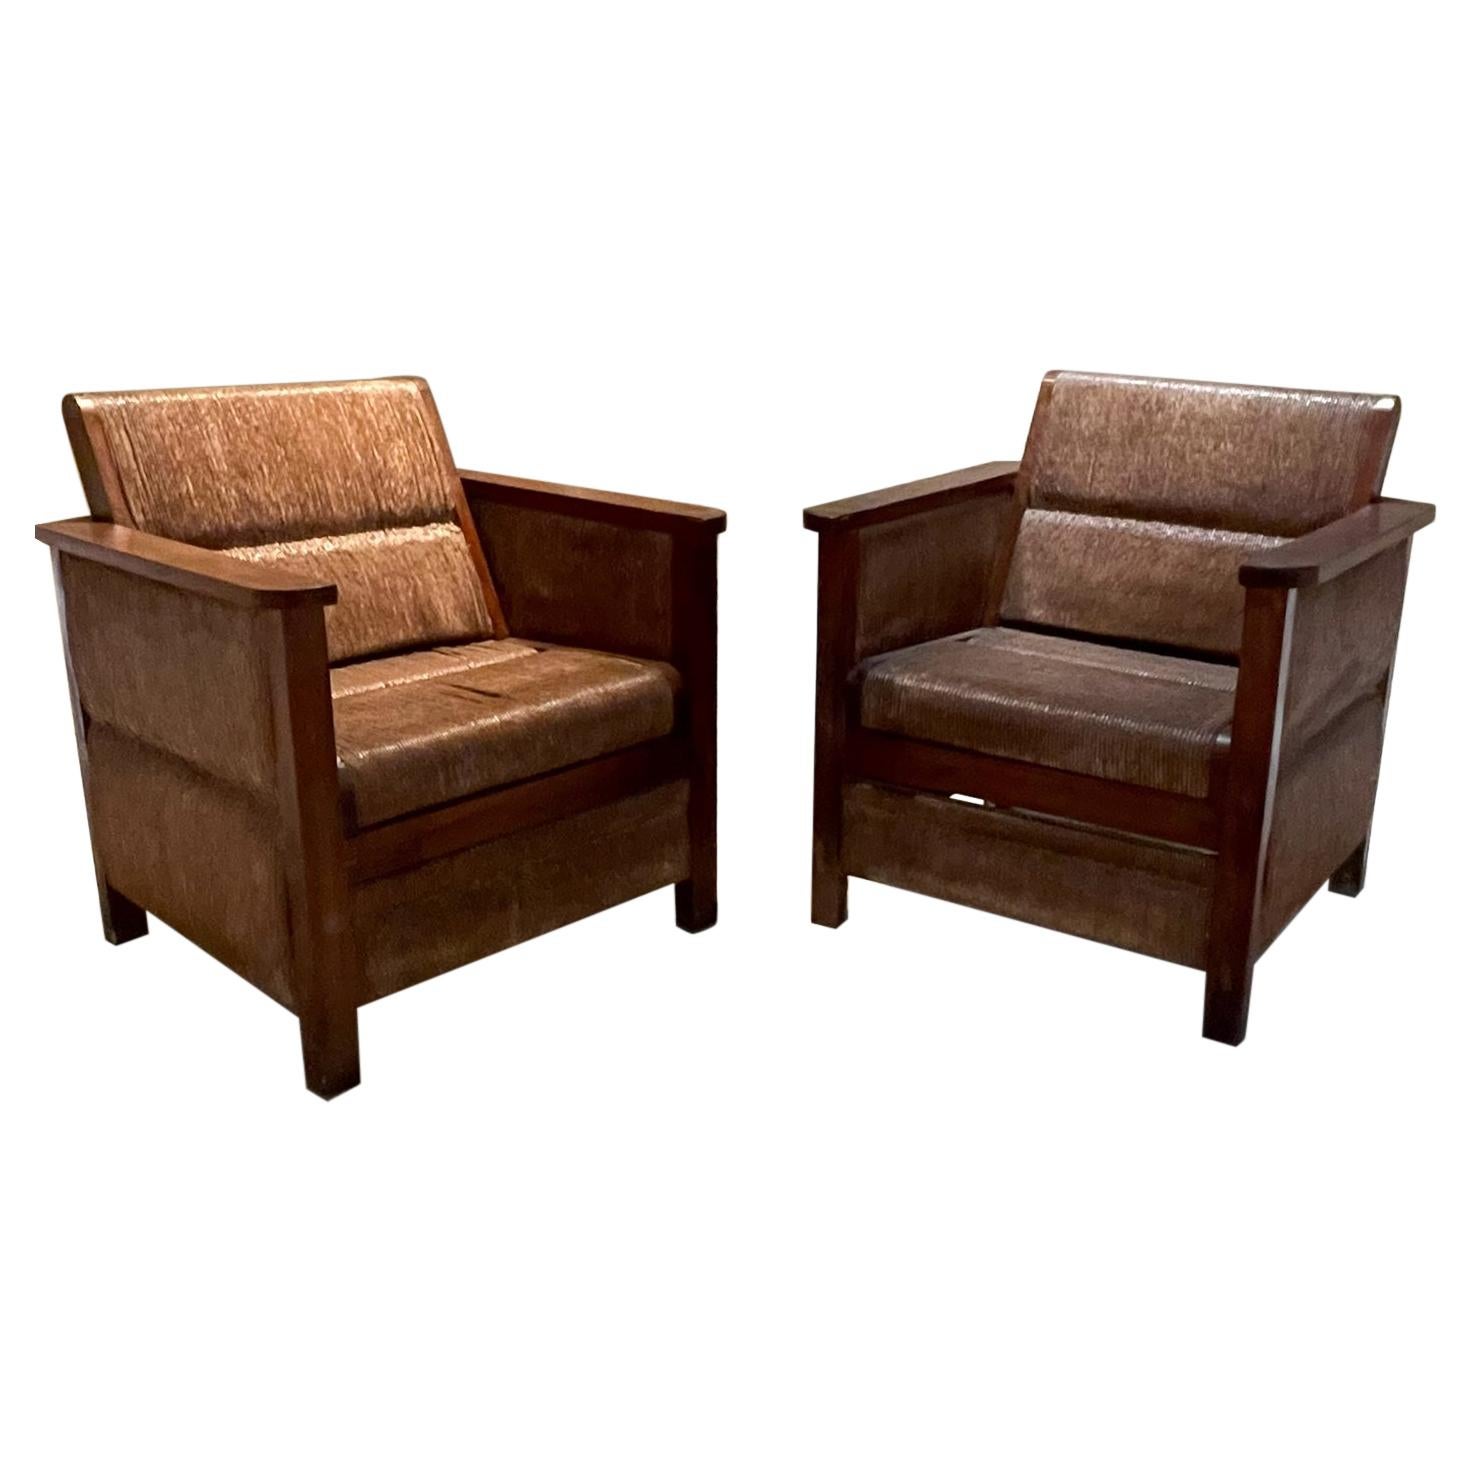 Exclusive Armchairs Exotic Palmwood Stately Hacienda 1950s Guadalajara Mexico Estate
Raw materials in an organic modern midcentury piece unparalleled quality and craftmanship.
Tropical Sustainable Palm Wood. 
In the style of architect Francisco